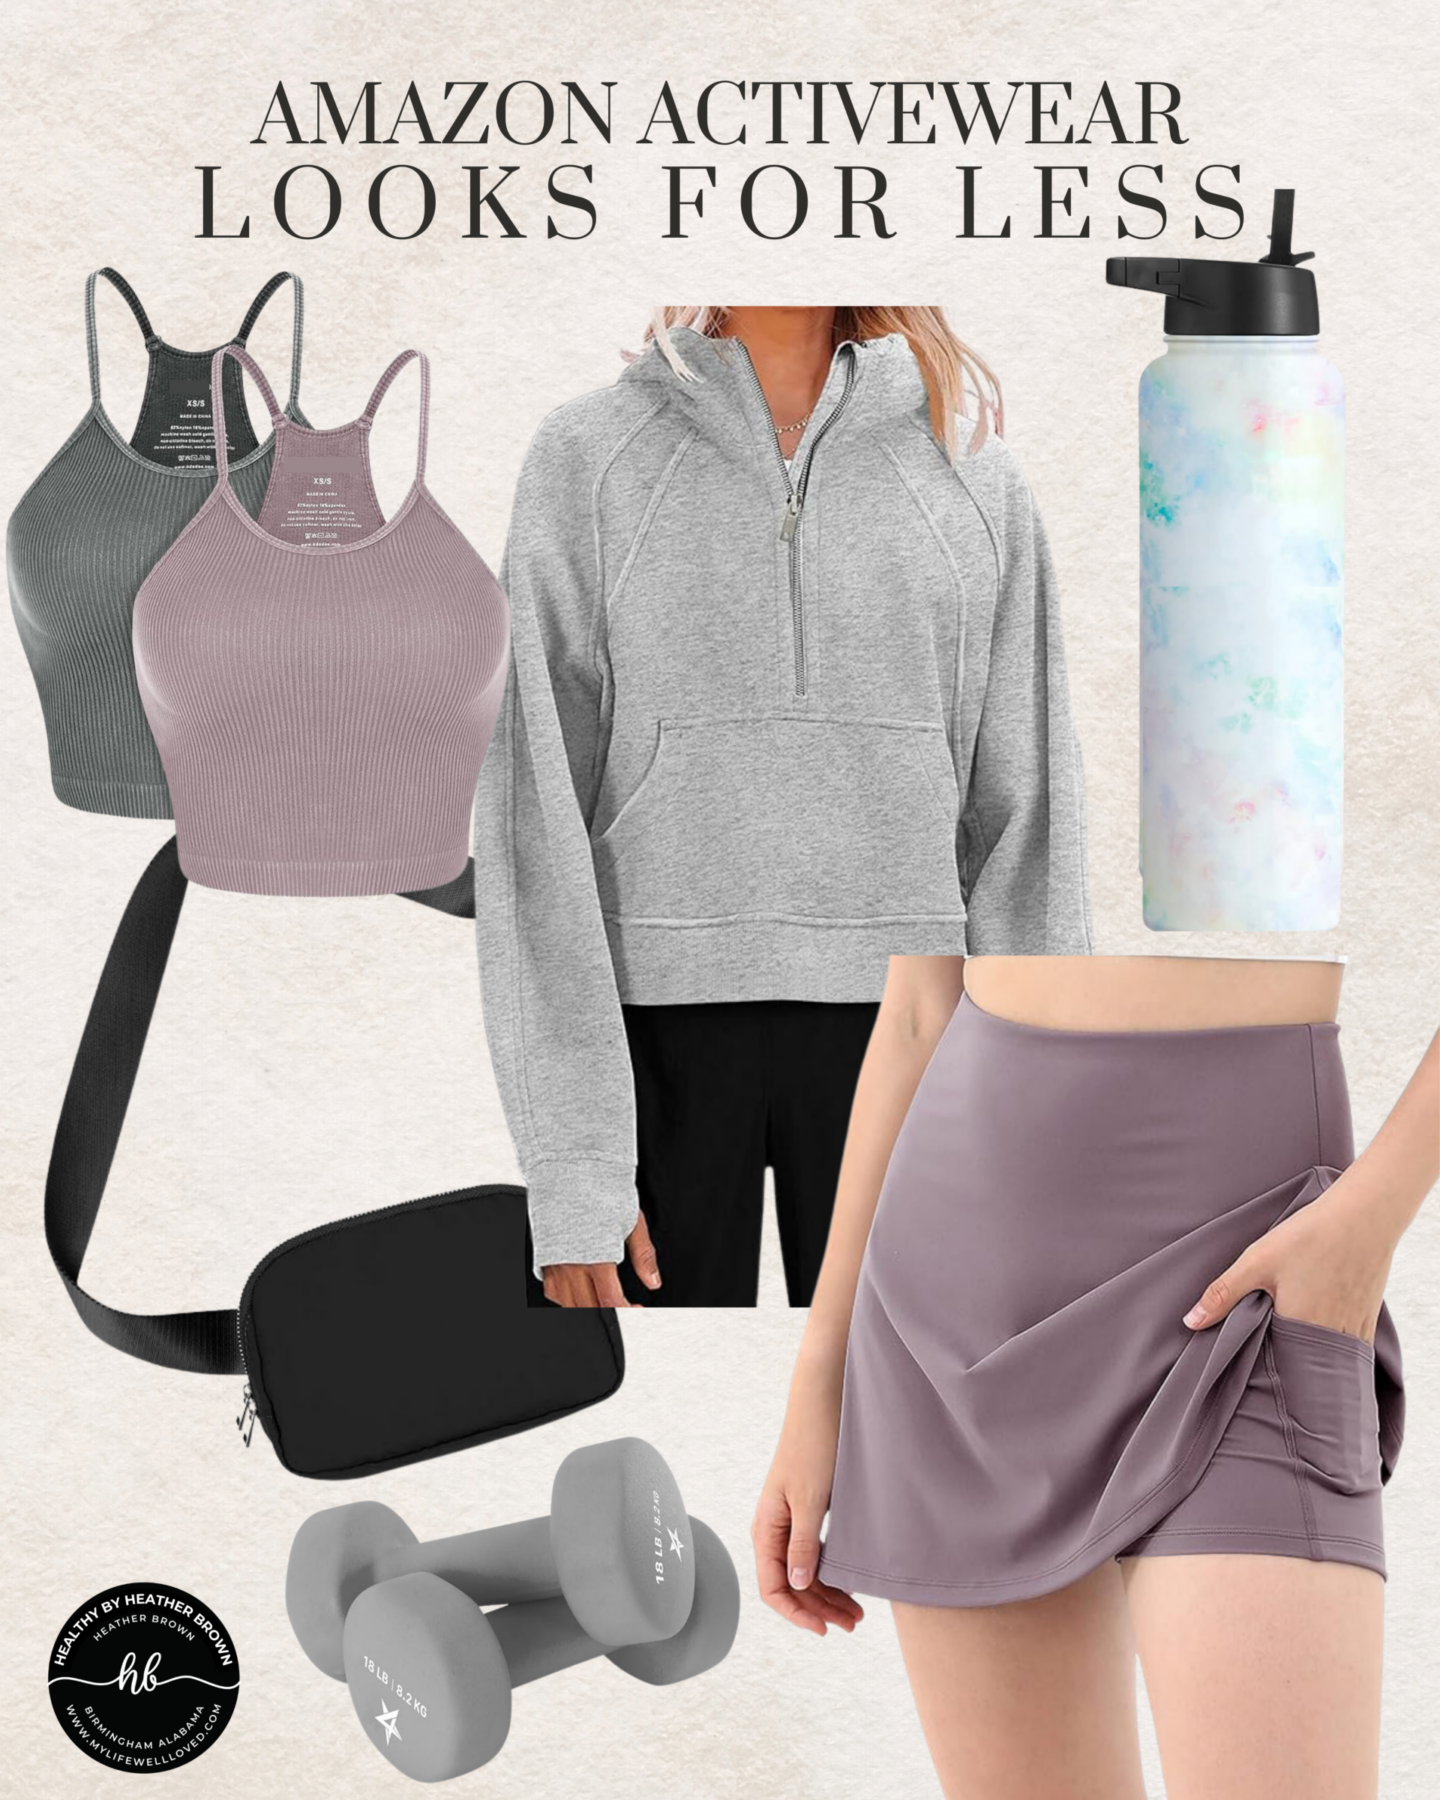 Healthy By Heather Brown, podcast host, shares her best Amazon activewear looks for less including leggings, shorts, tanks, bags, & more!